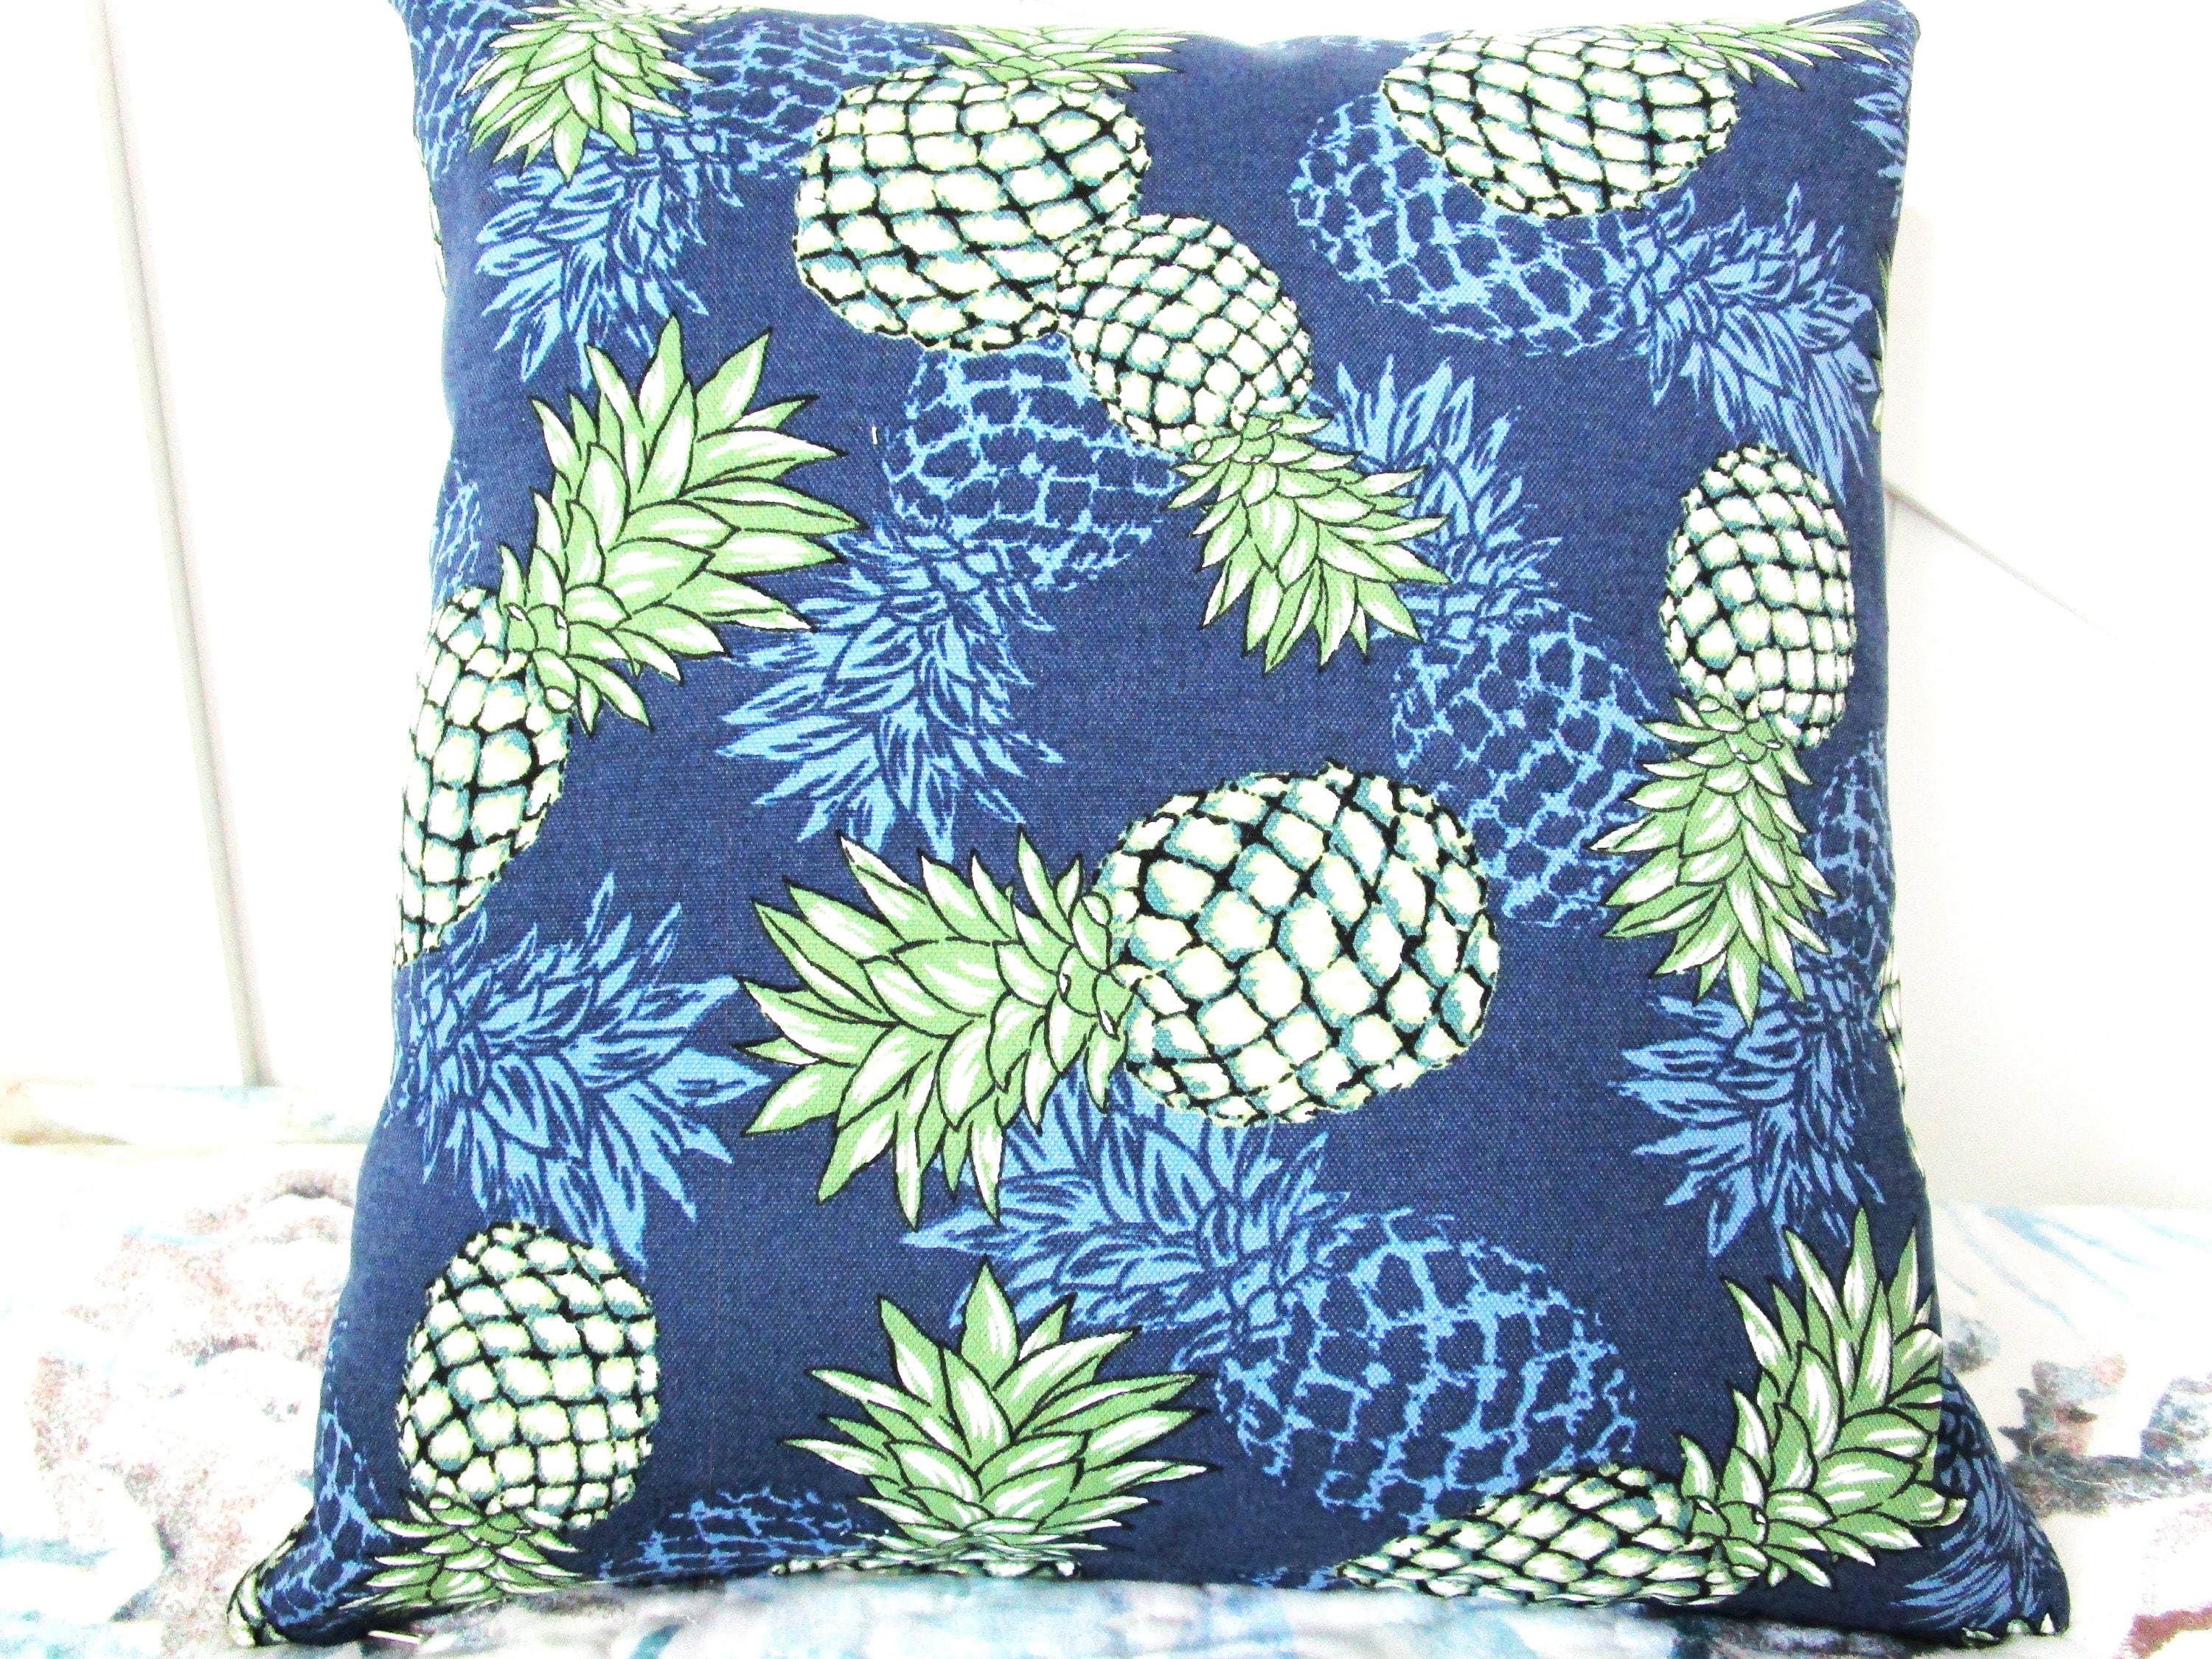 Blue Decorative Outdoor Throw Pillows For Patio Furniture Set Of 2 Clearance  New